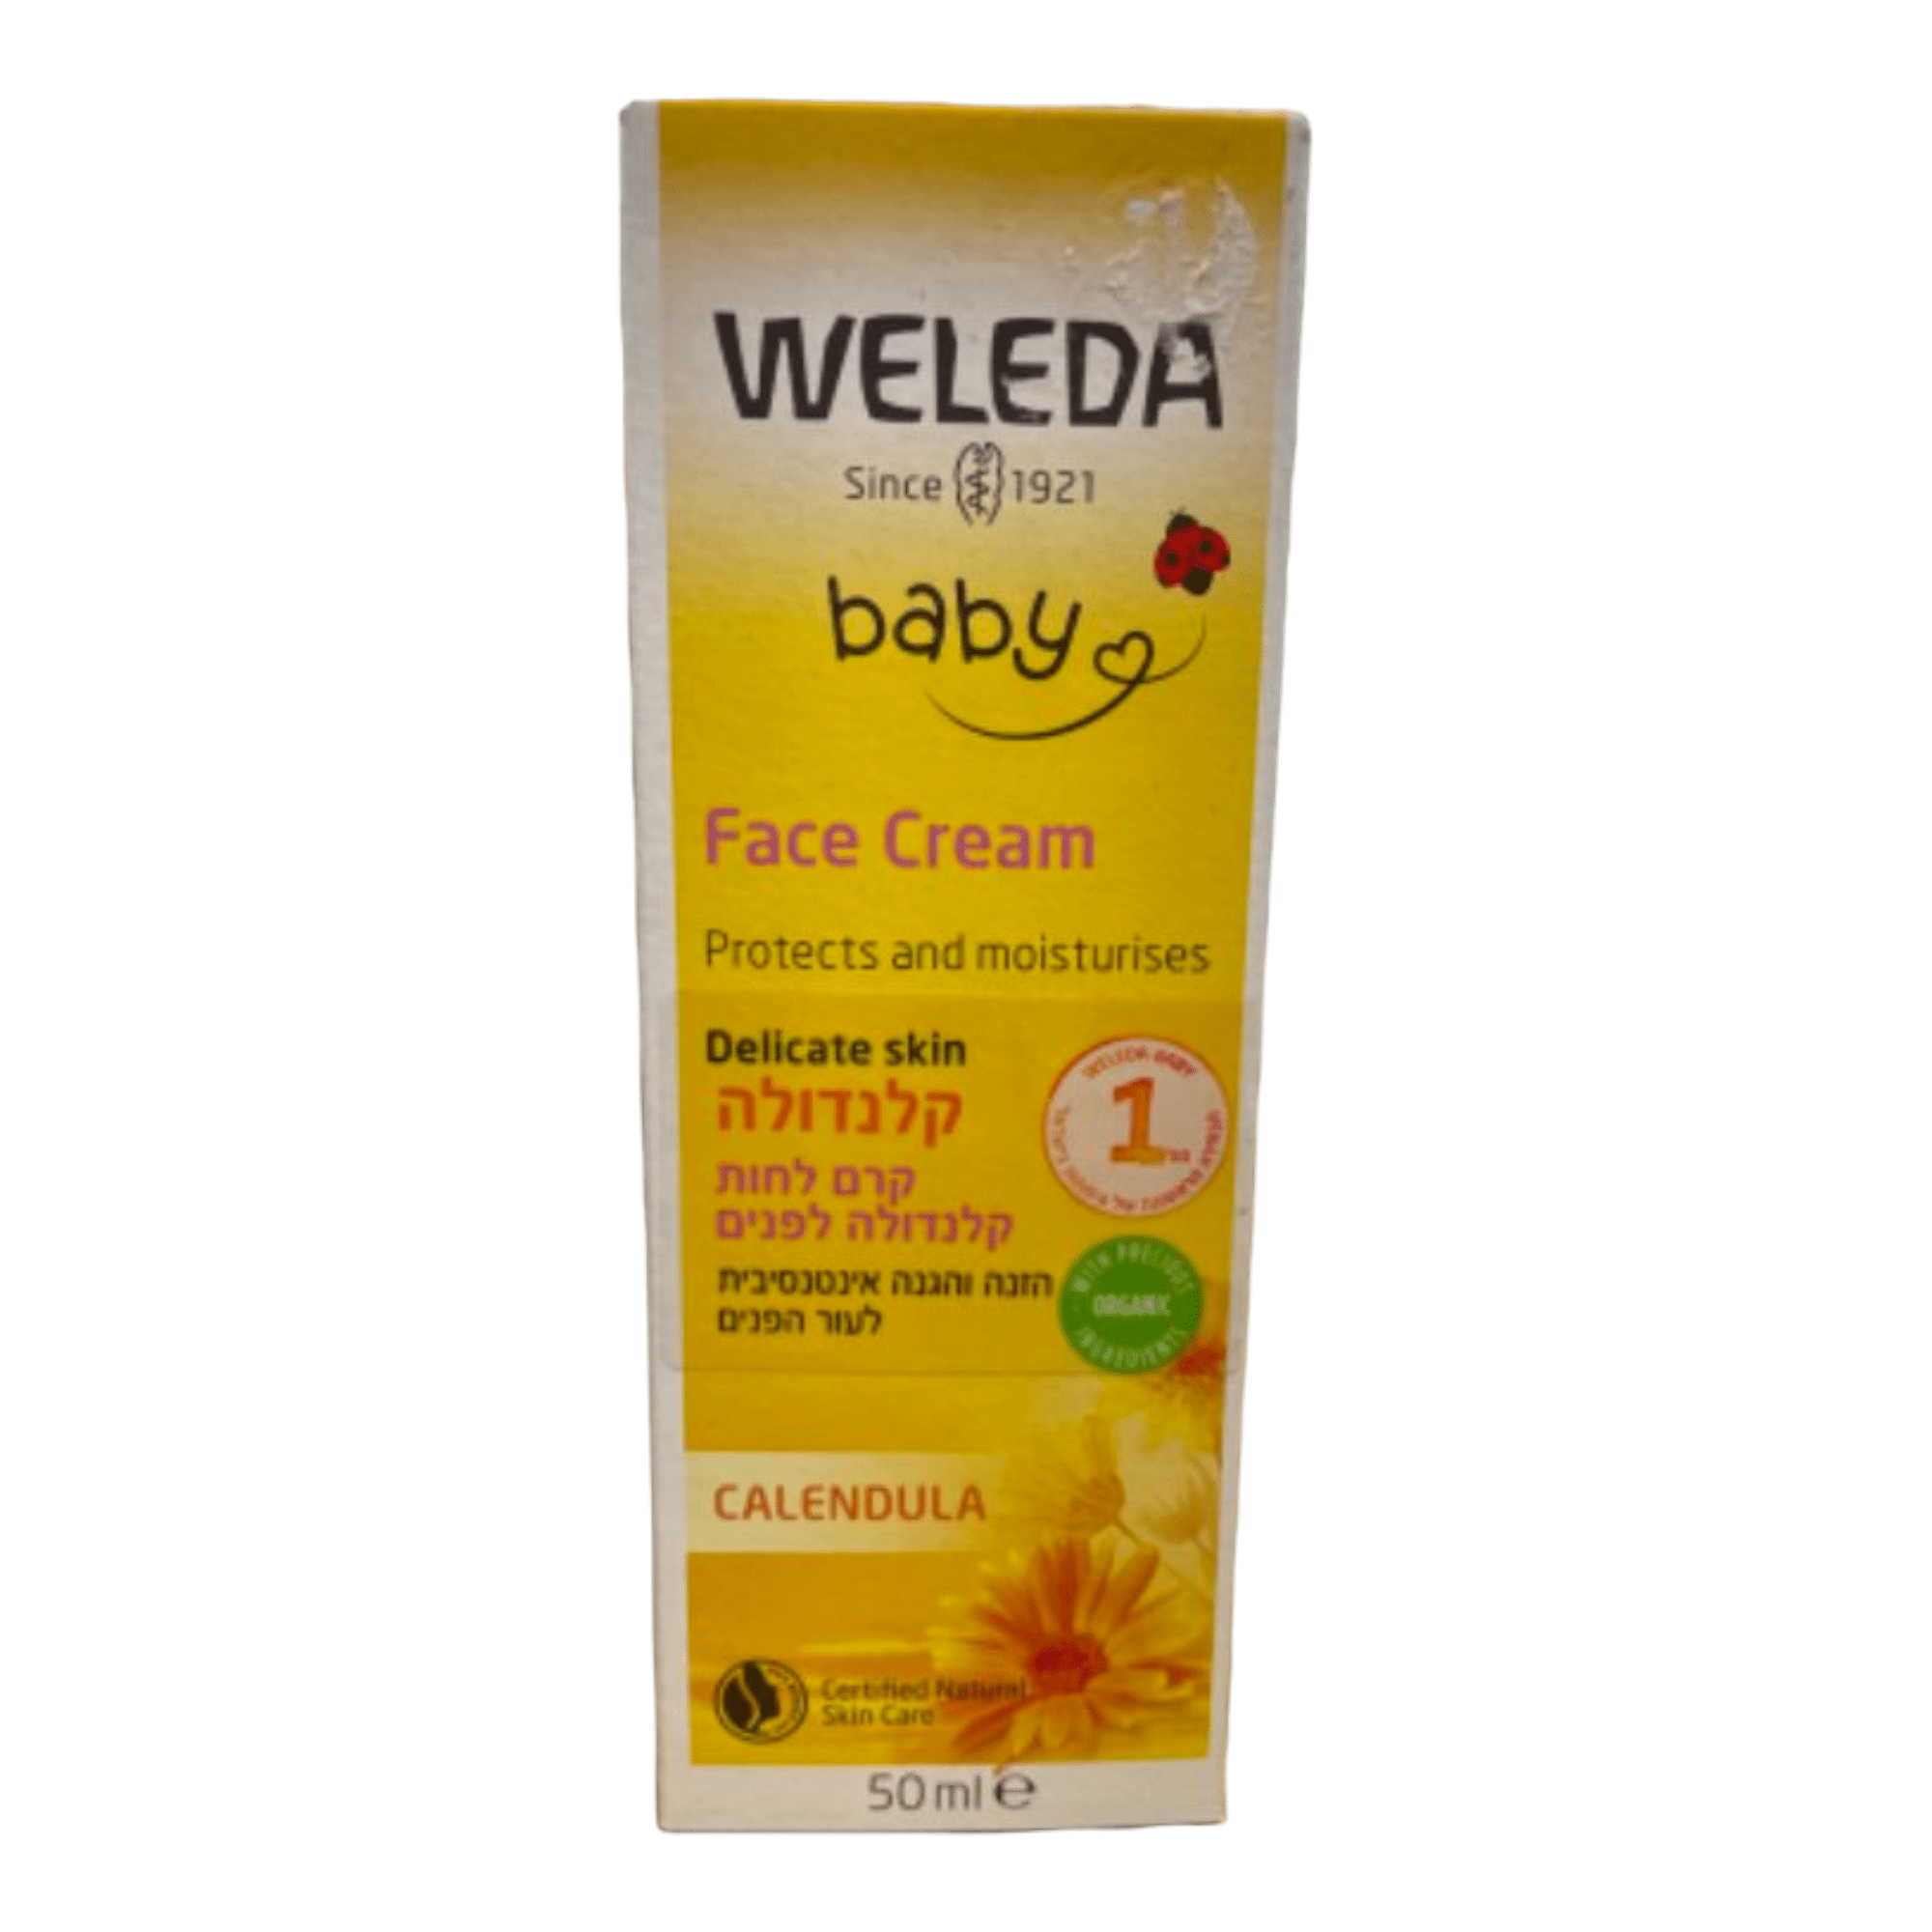 WELEDA NO Since 1921 baby Face Cream Protects and moisturises